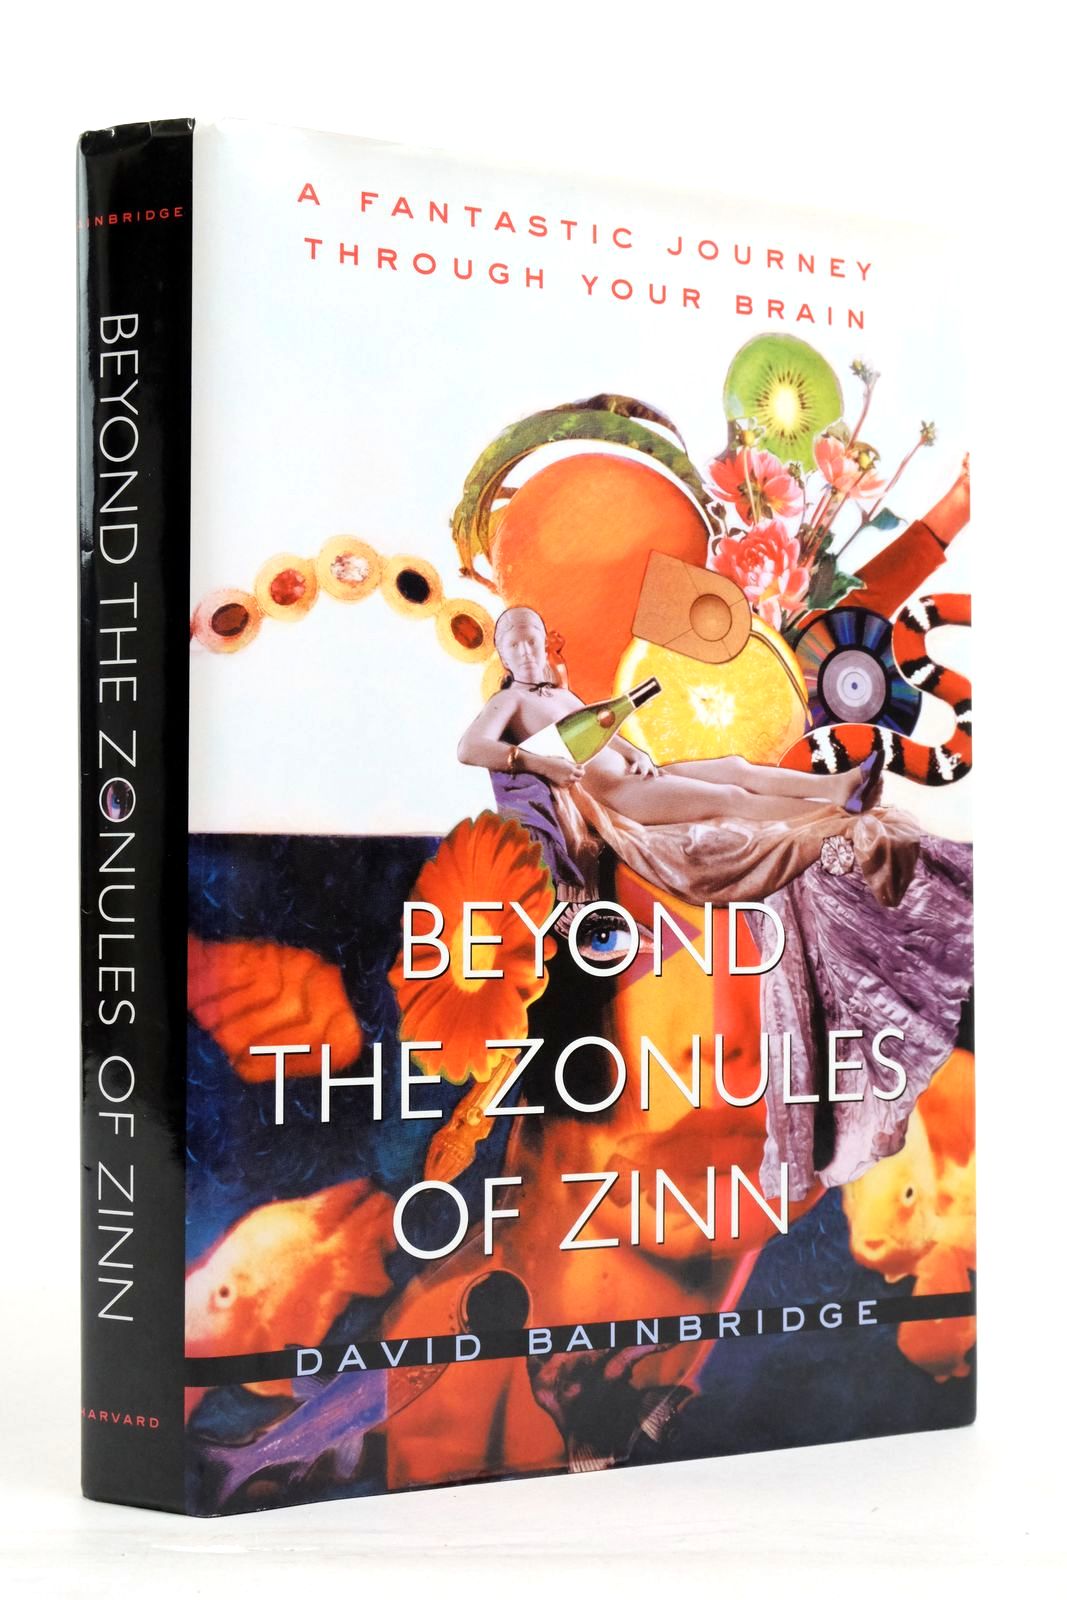 Photo of BEYOND THE ZONULES OF ZINN: A FANTASTIC JOURNEY THROUGH YOUR BRAIN written by Bainbridge, David published by Harvard University Press (STOCK CODE: 2137787)  for sale by Stella & Rose's Books